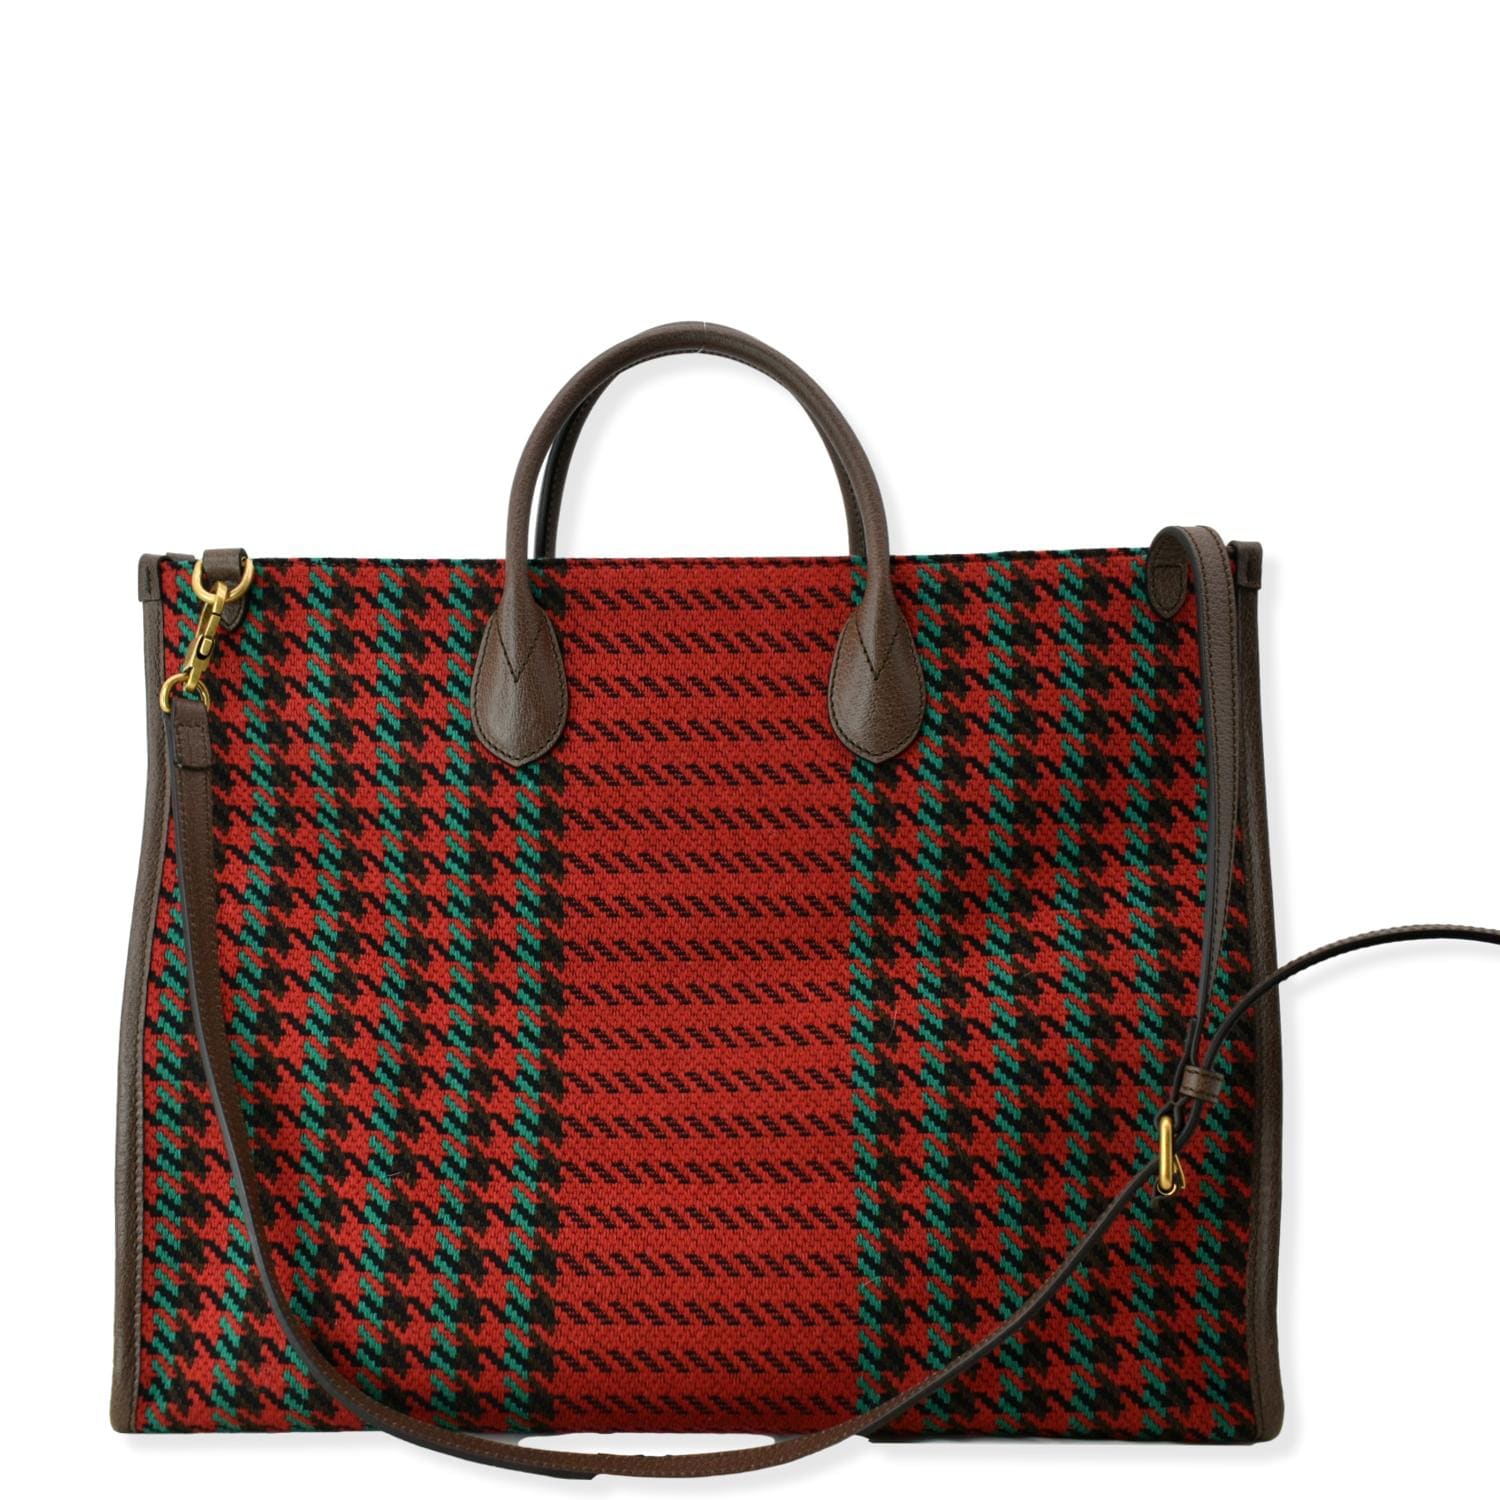 Gucci Plaid Bags & Handbags for Women, Authenticity Guaranteed